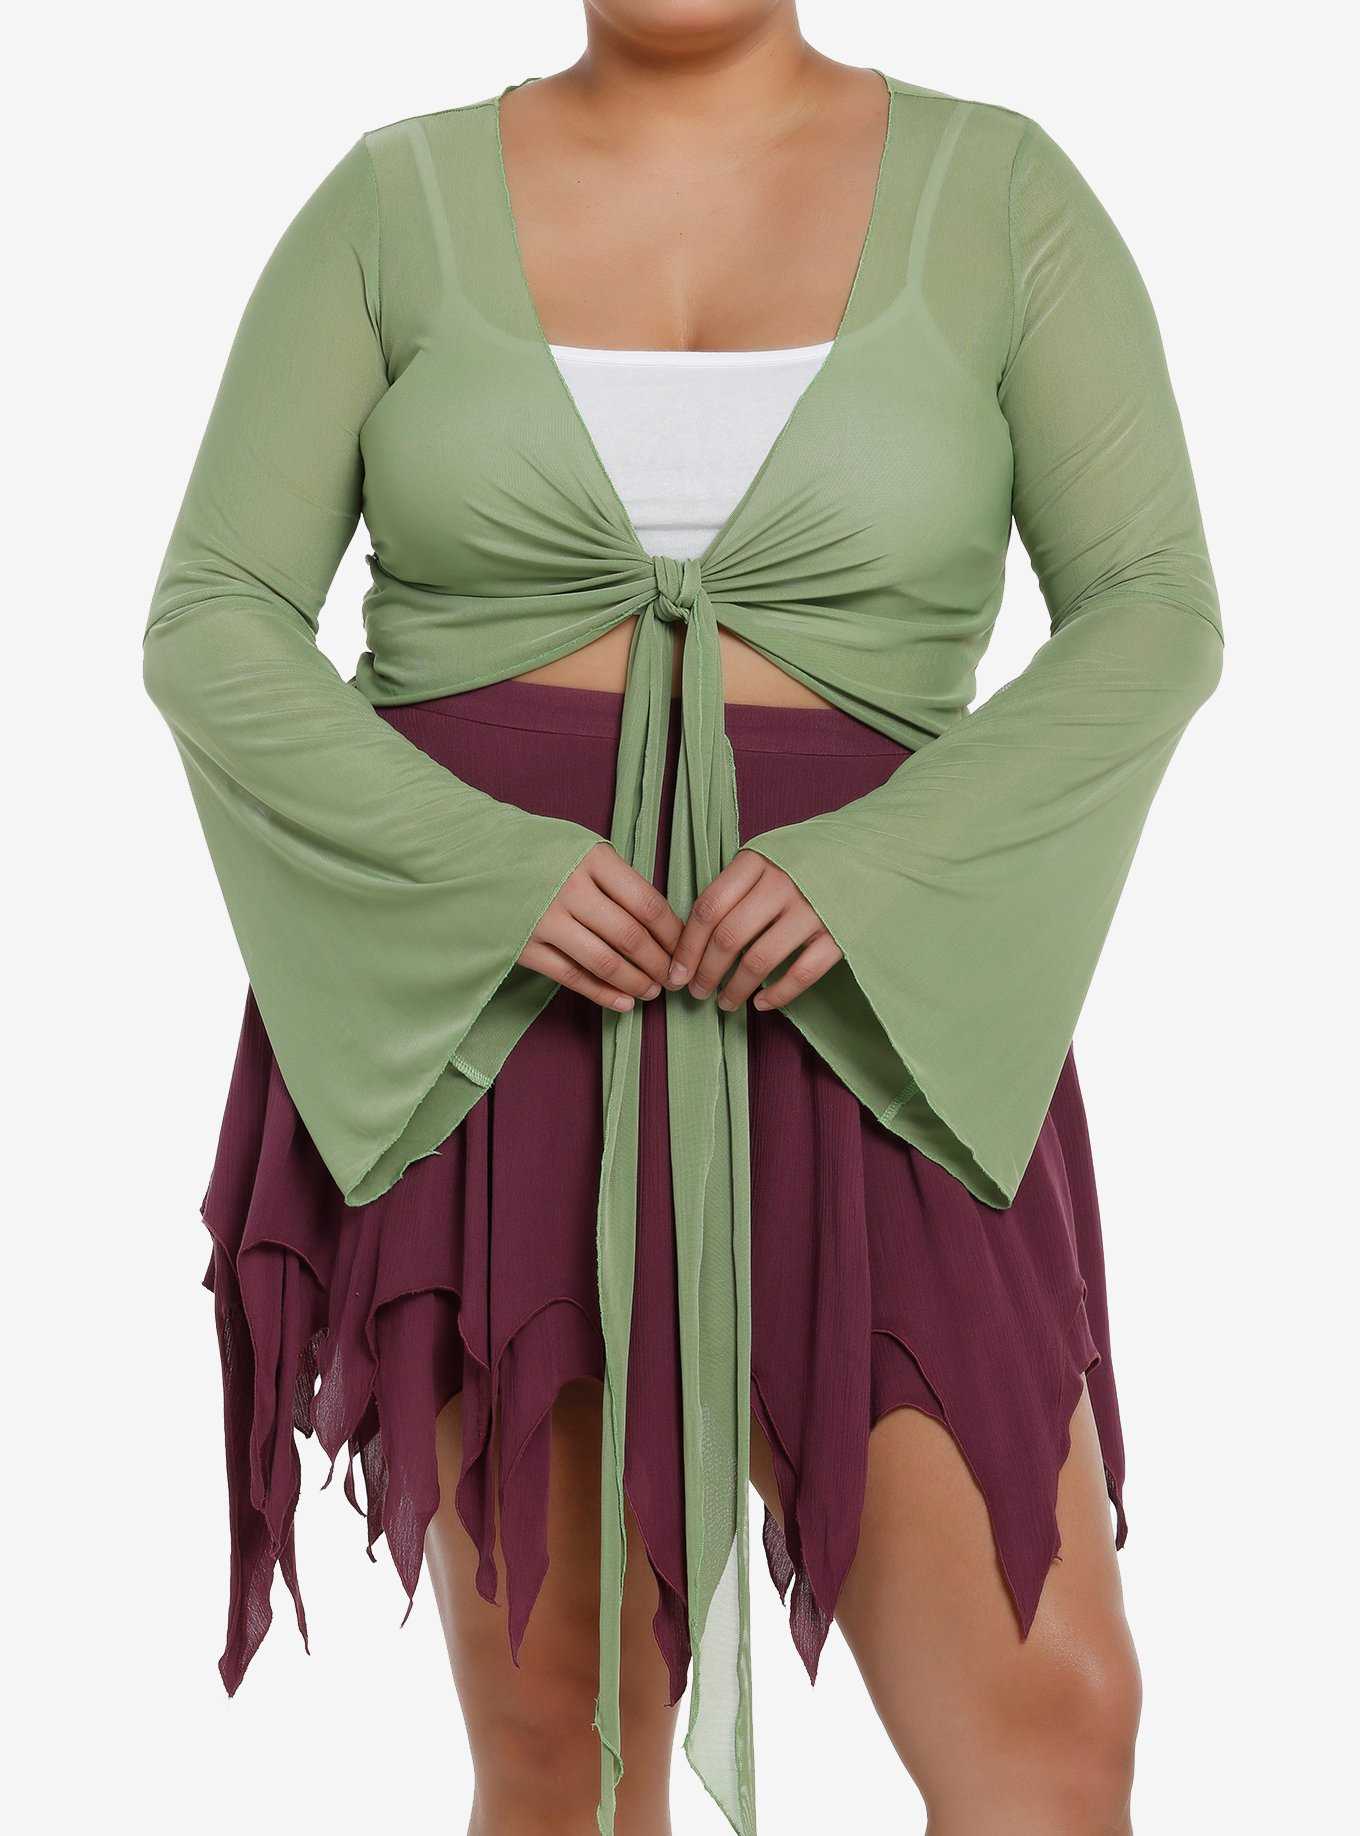 Thorn & Fable Green Mesh Girls Bell Sleeve Shrug Plus Size, , hi-res